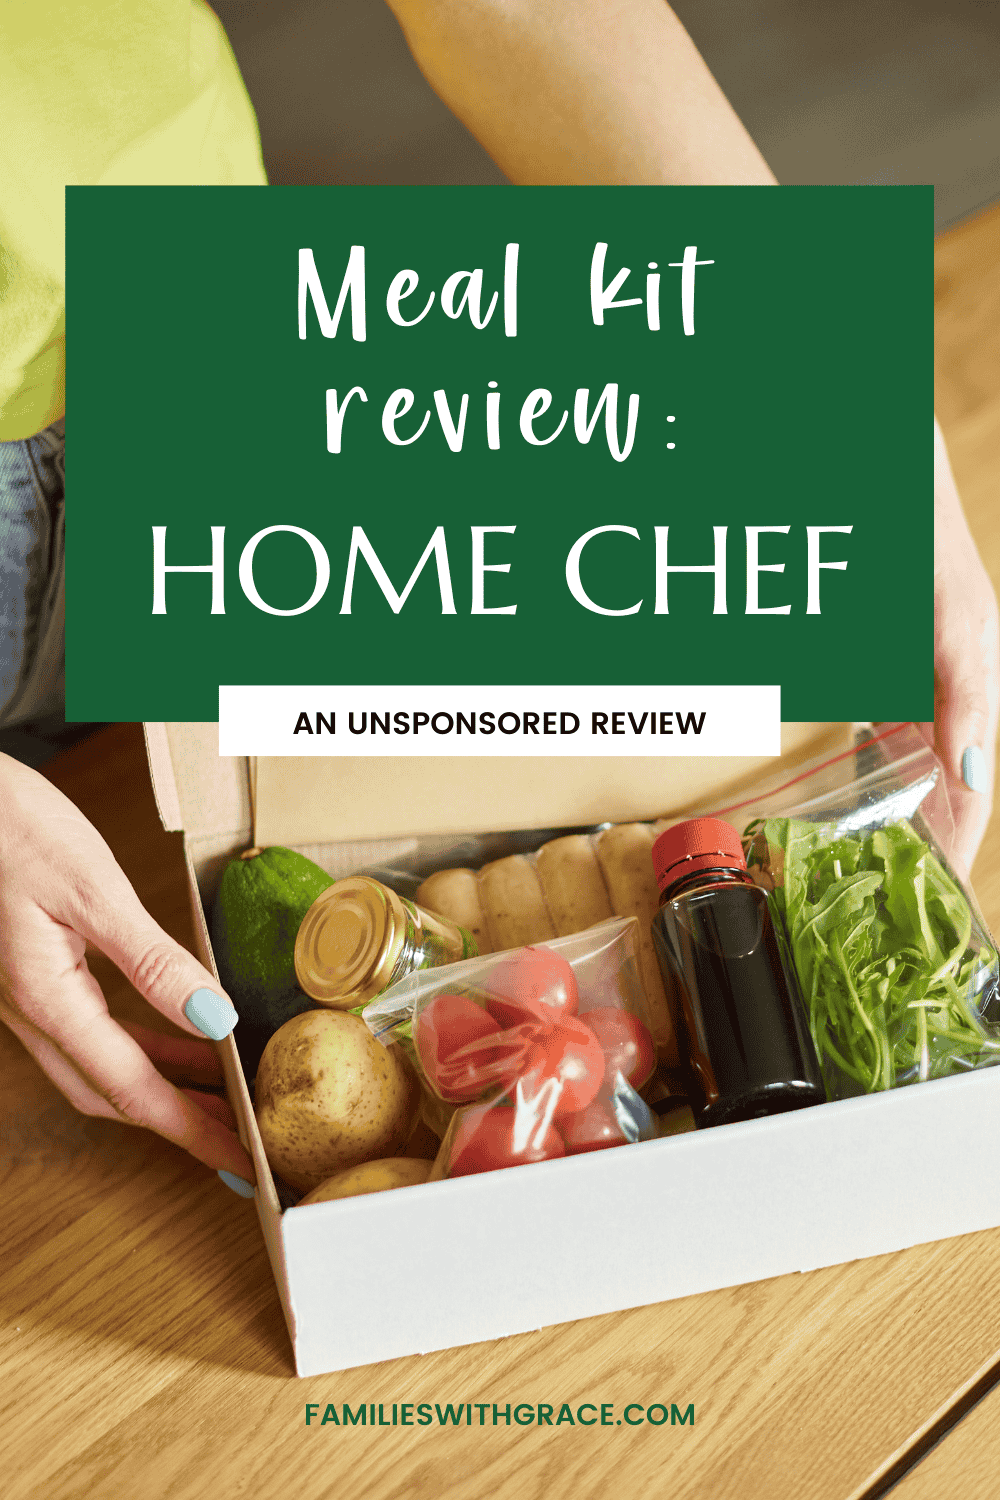 Meal kit review: Home Chef